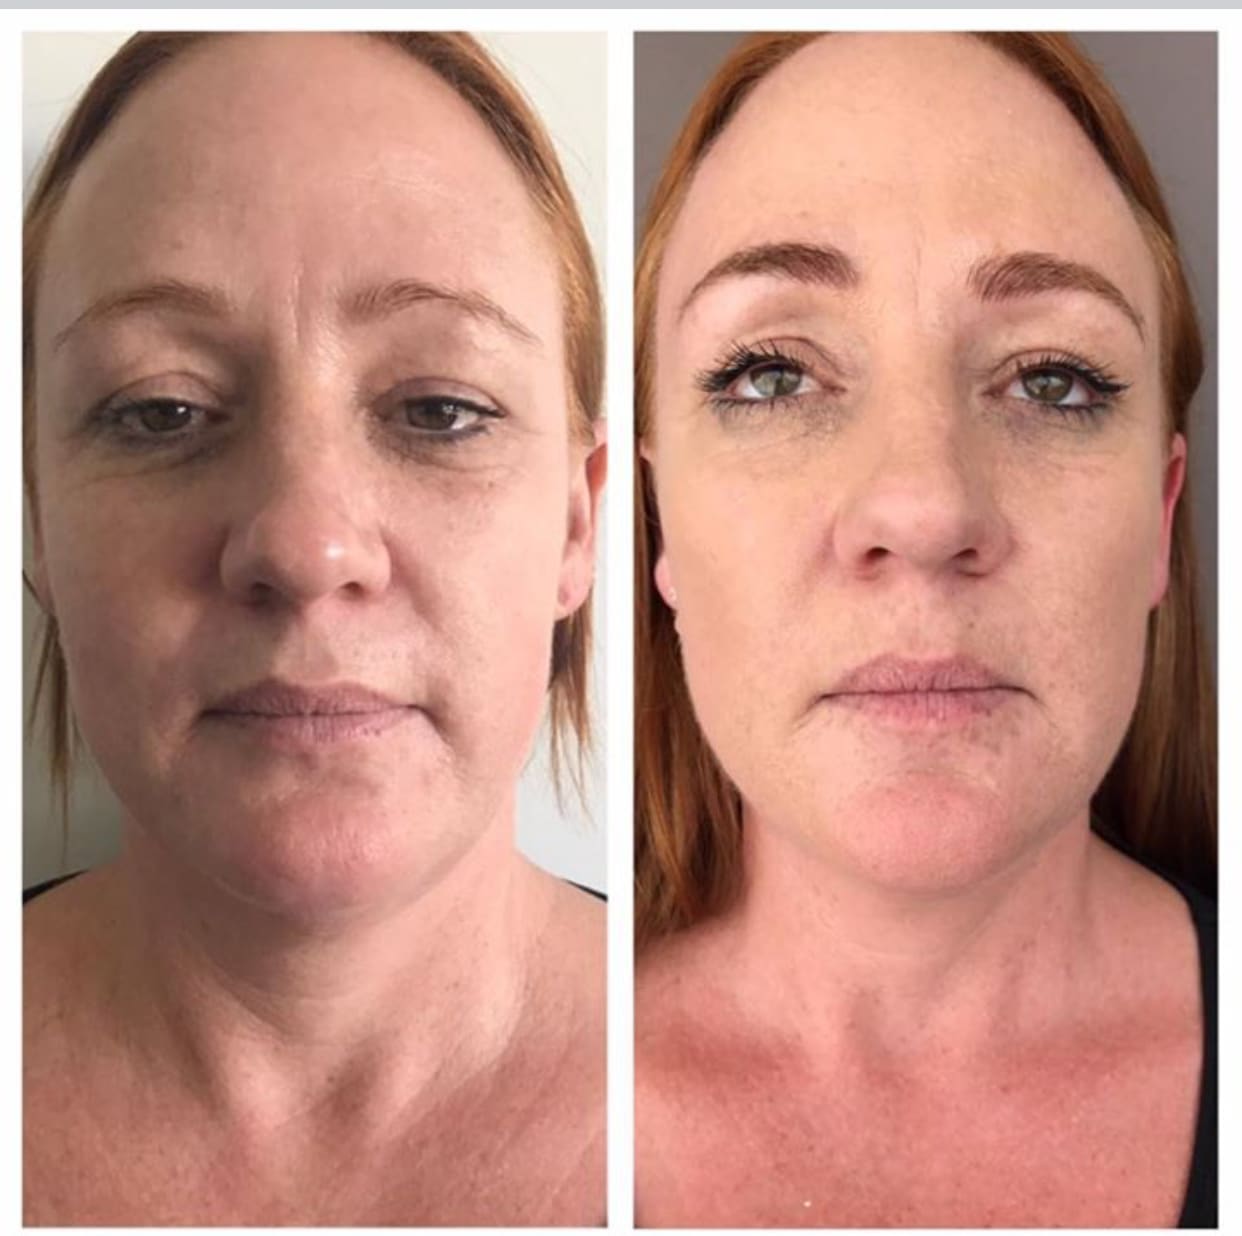 HIFU Face and Neck Lifts